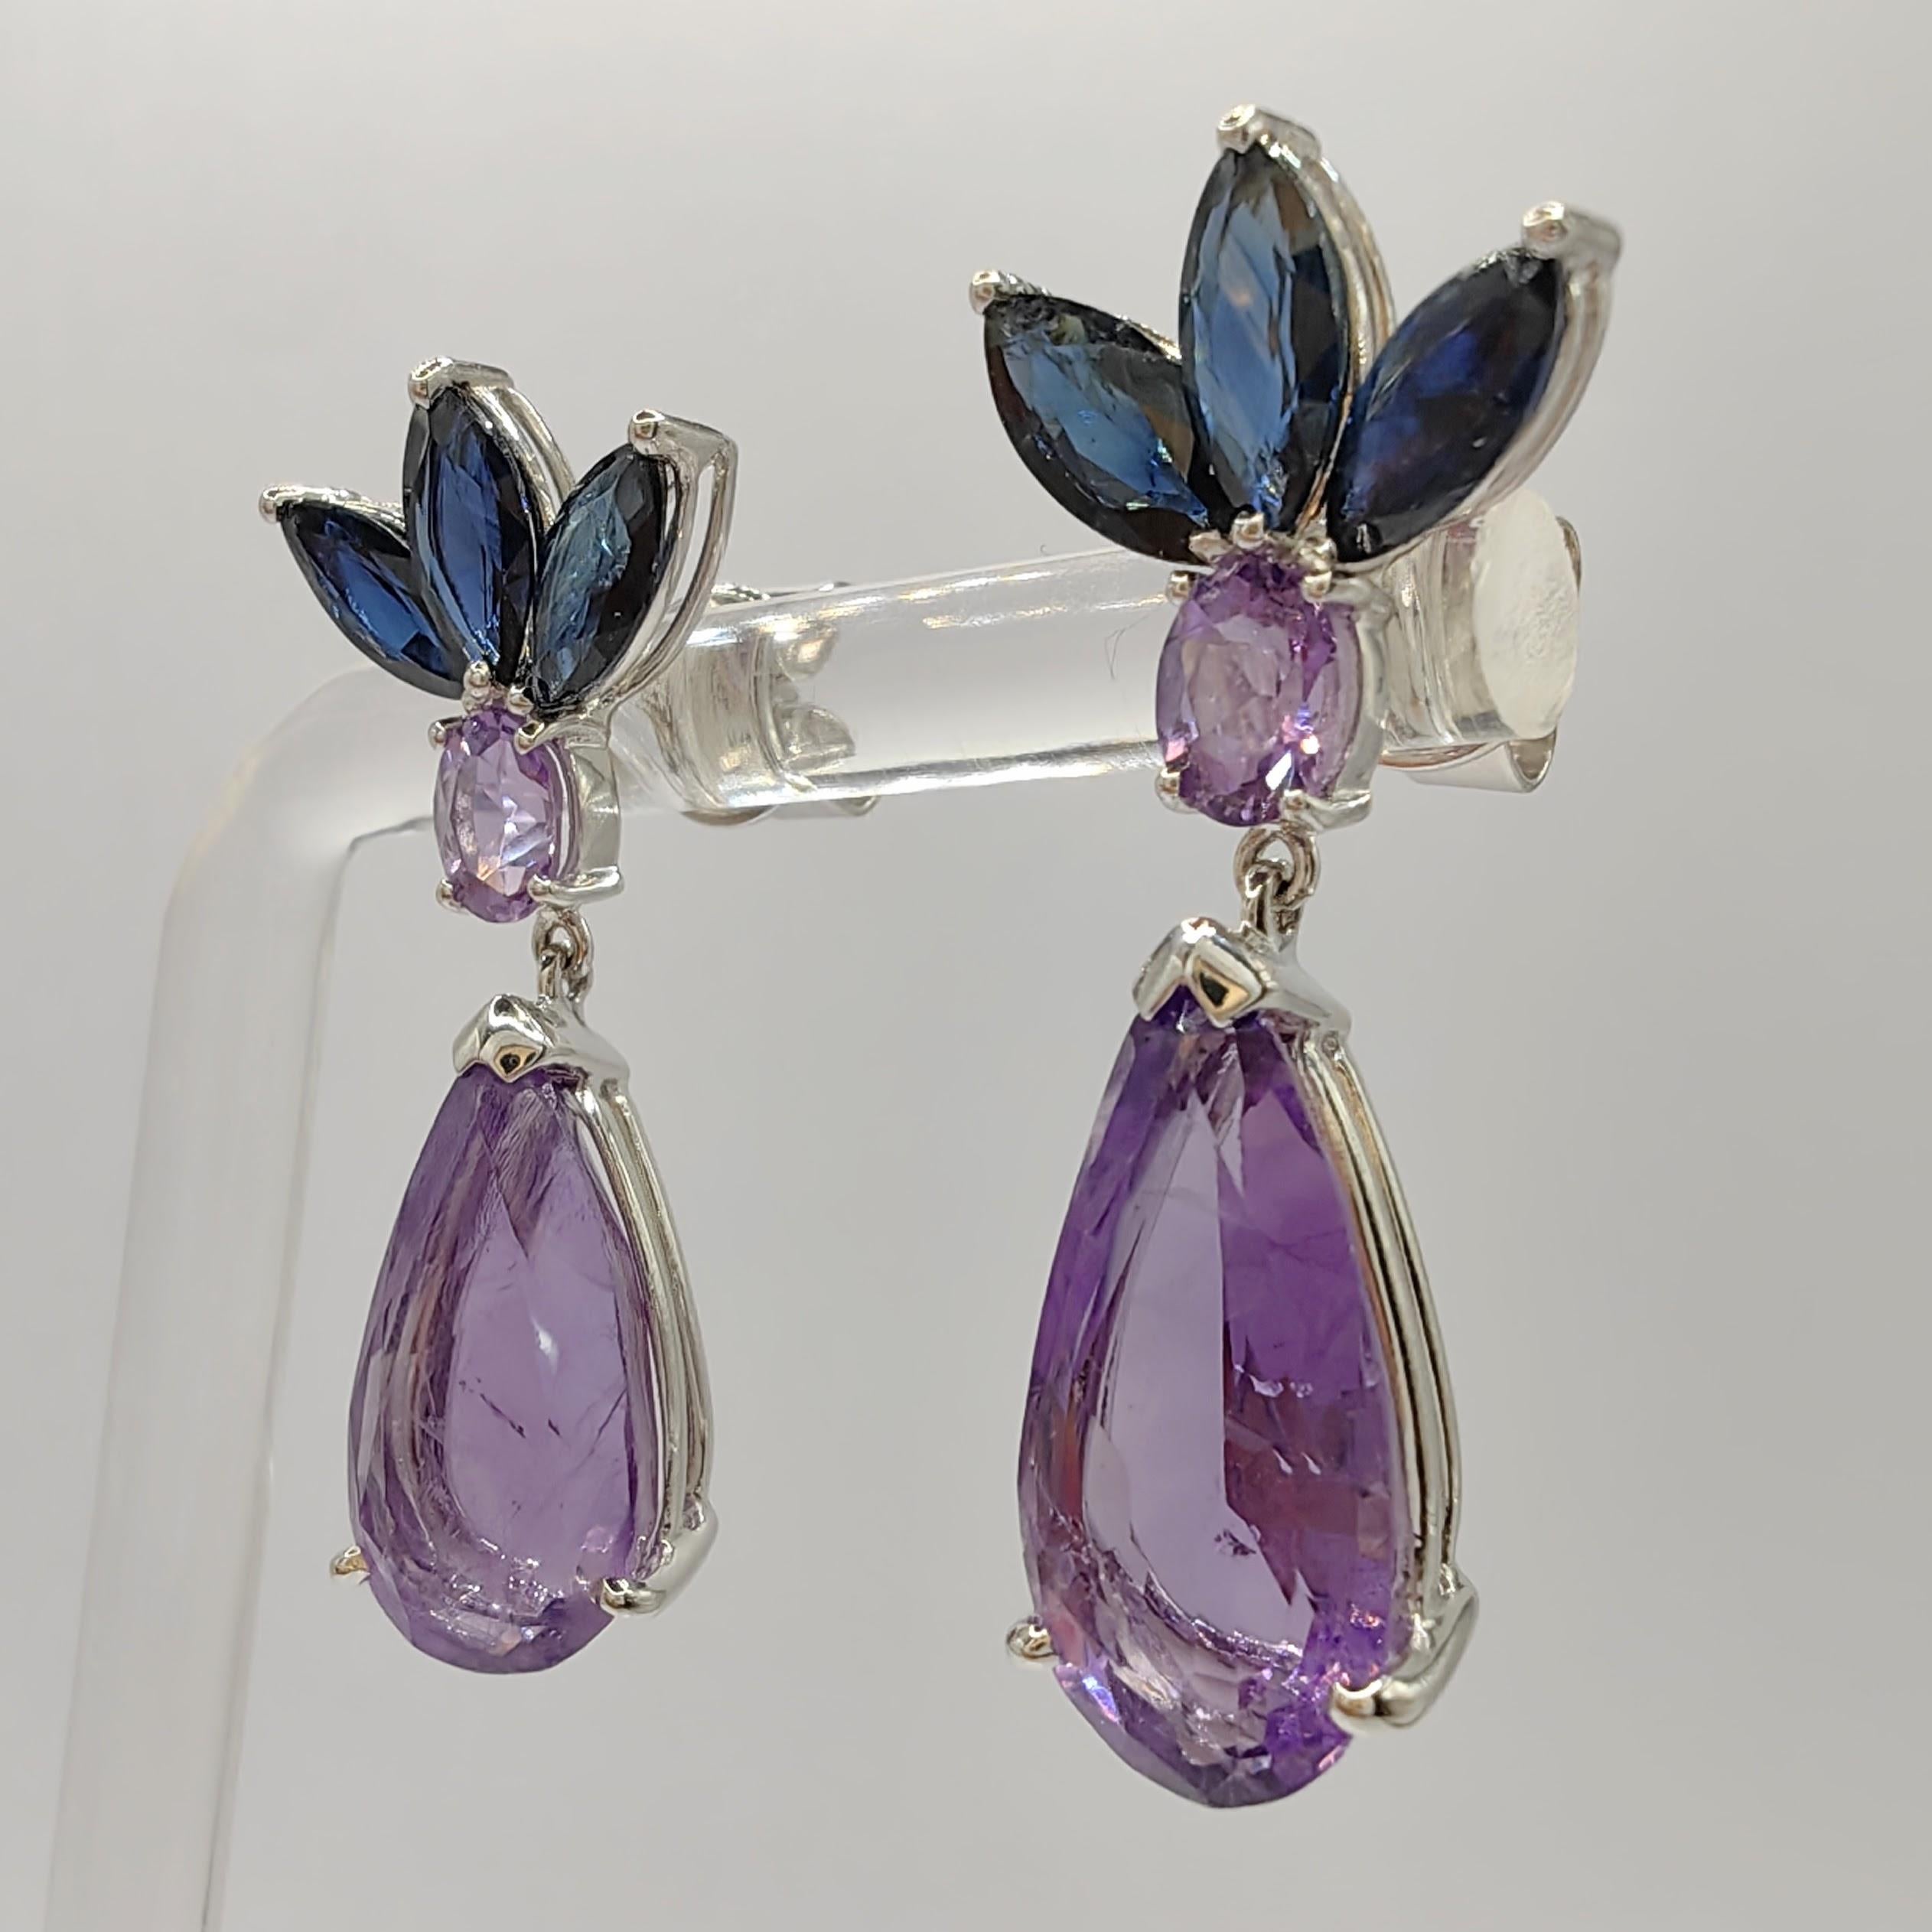 Contemporary 8.00ct Amethyst & 2.85ct Blue Sapphire Dangling Drop Earrings in 18K White Gold For Sale